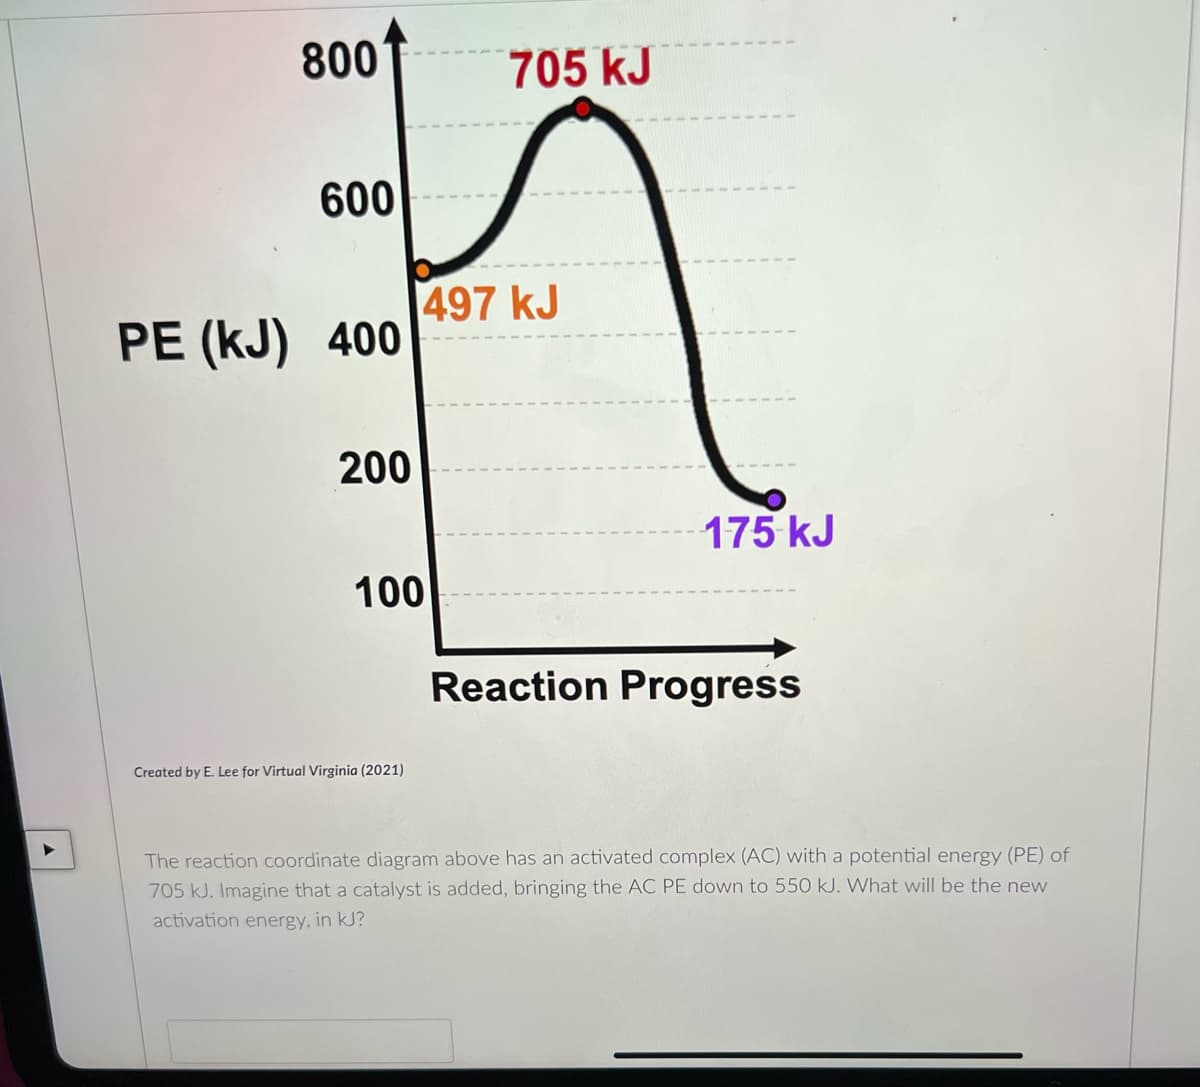 800
705 kJ
600
497 kJ
PE (kJ) 400
200
175 kJ
100
Reaction Progress
Created by E. Lee for Virtual Virginia (2021)
The reaction coordinate diagram above has an activated complex (AC) with a potential energy (PE) of
705 kJ. Imagine that a catalyst is added, bringing the AC PE down to 550 kJ. What will be the new
activation energy, in kJ?
